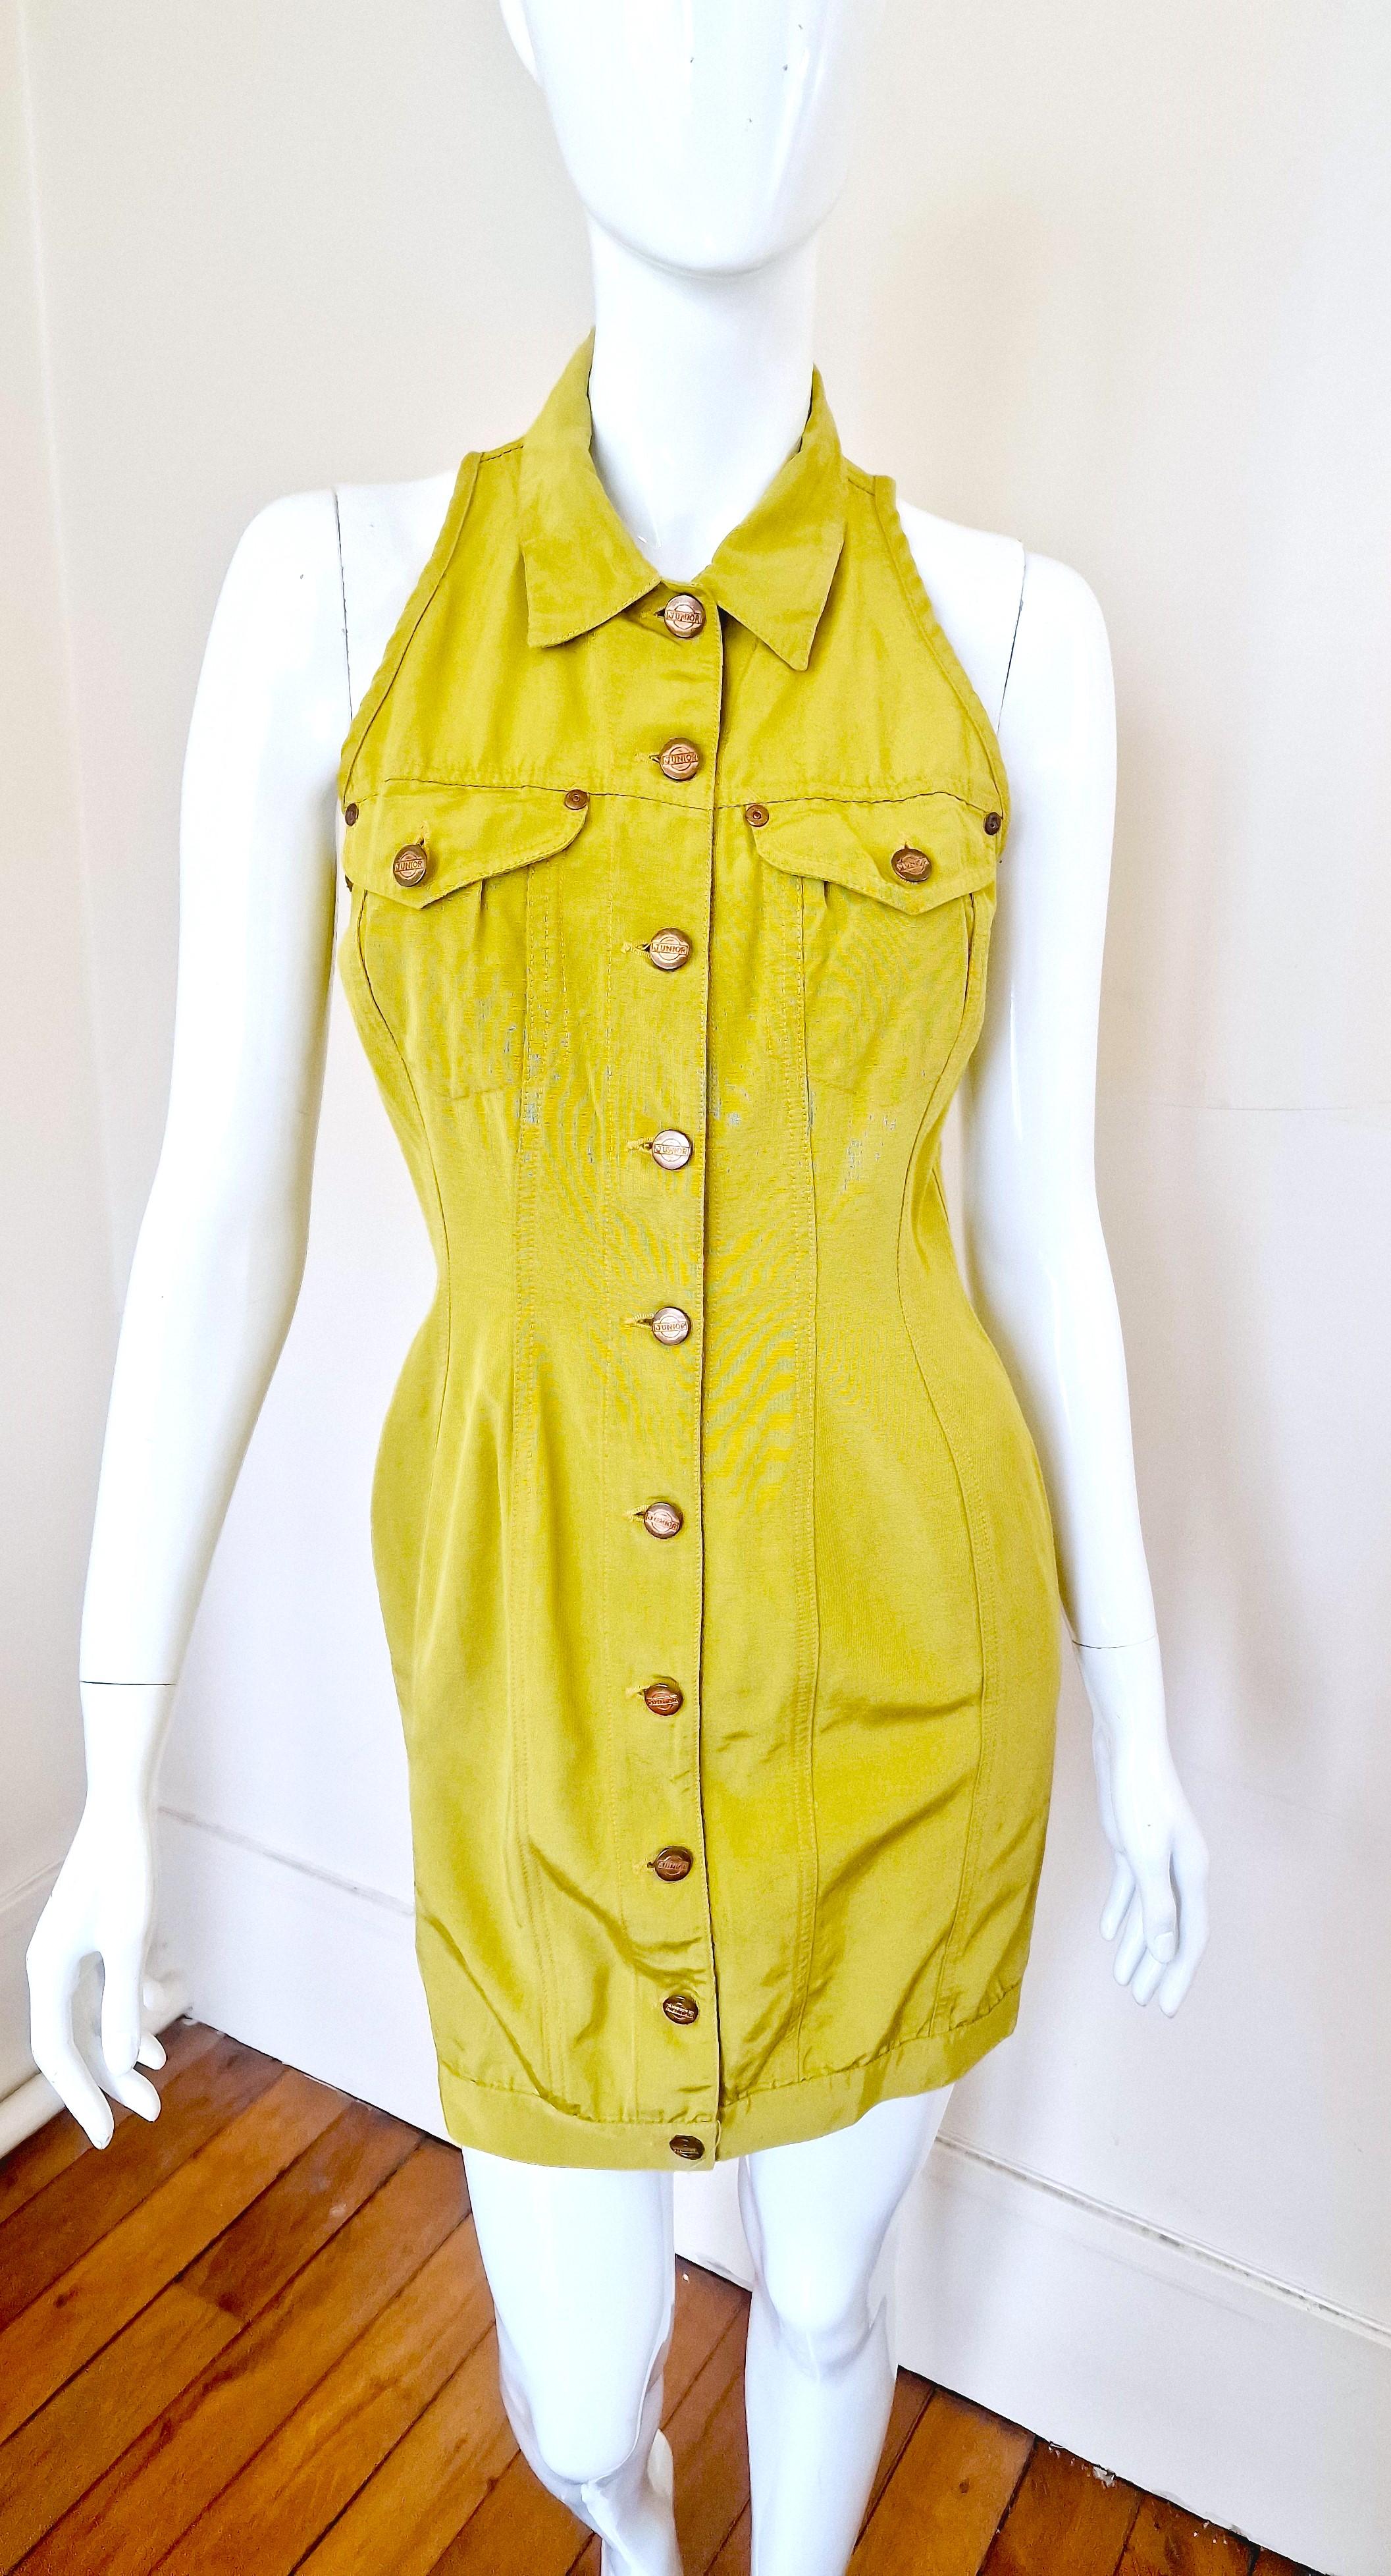 Documented dress by Jean Paul Gaultier!
From the “Around the World in 168 Outfits” Spring/Summer 1989 women’s collection!
Junior buttons.

VERY GOOD Condition.

SIZE
No size label.
Large.
Length: 85 cm / 335 inch
Bust: 43 cm / 16.9 inch
Waist: 37 cm